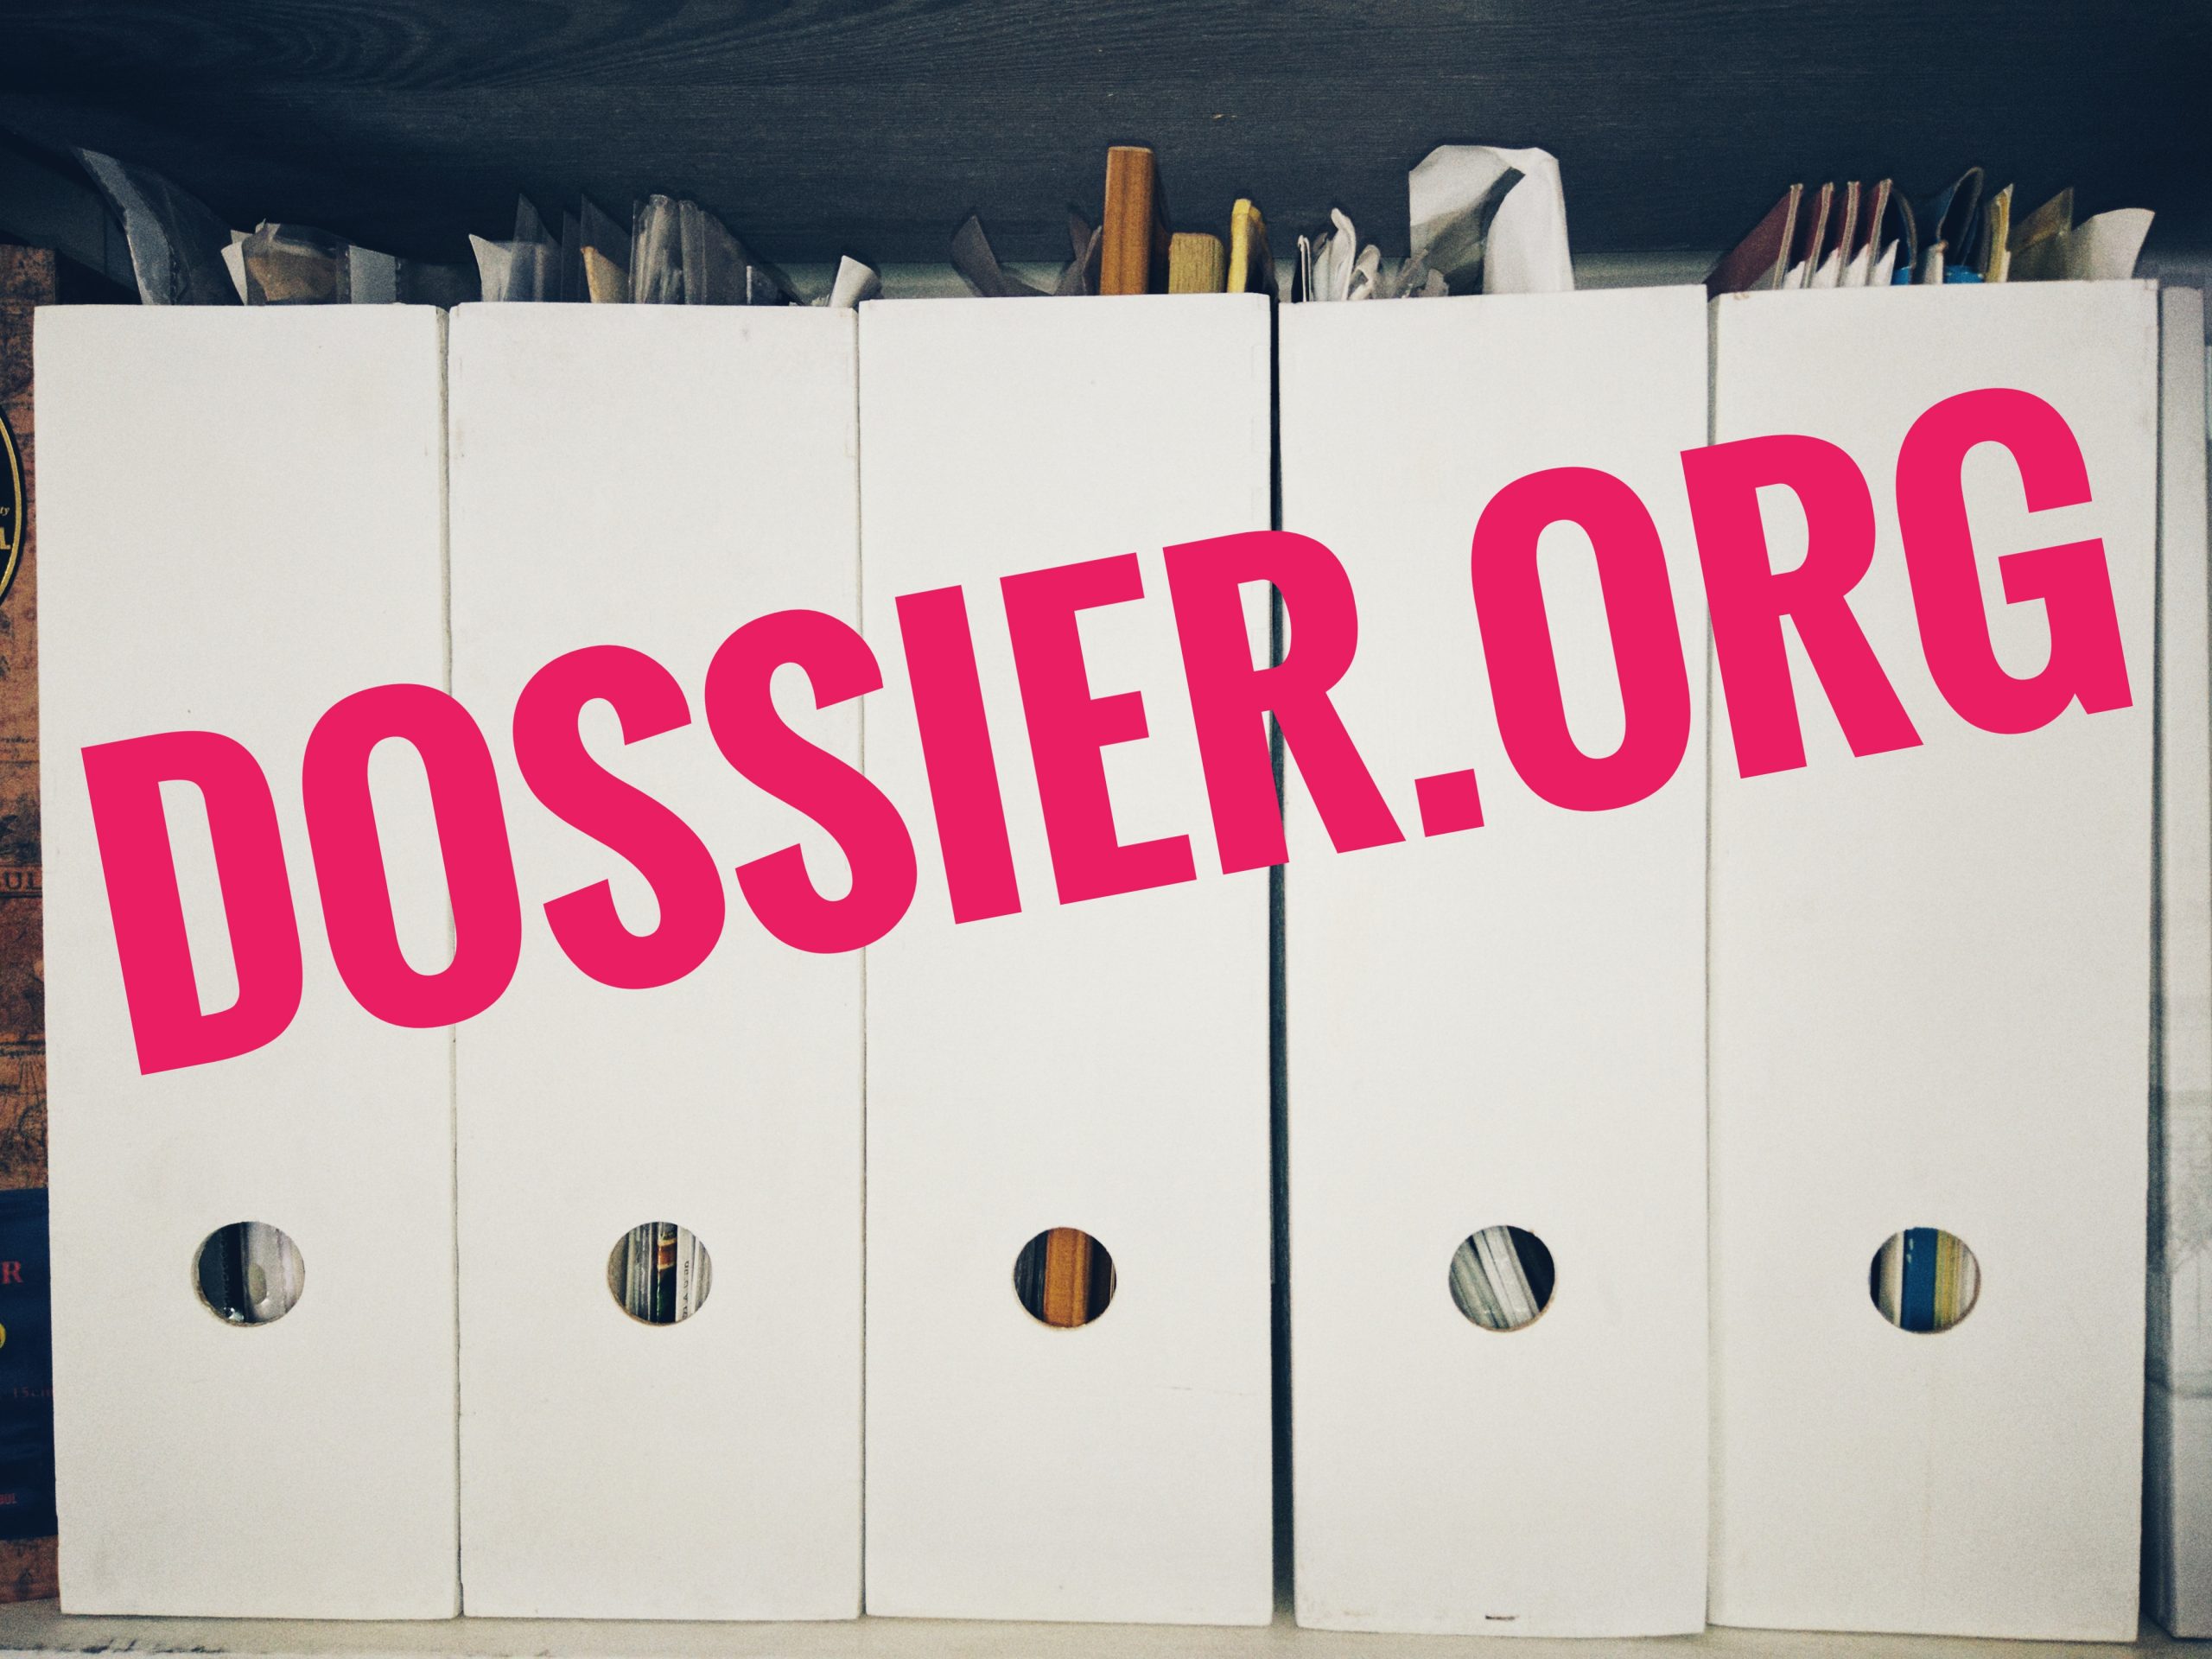 Dossier.org, domain name for sale